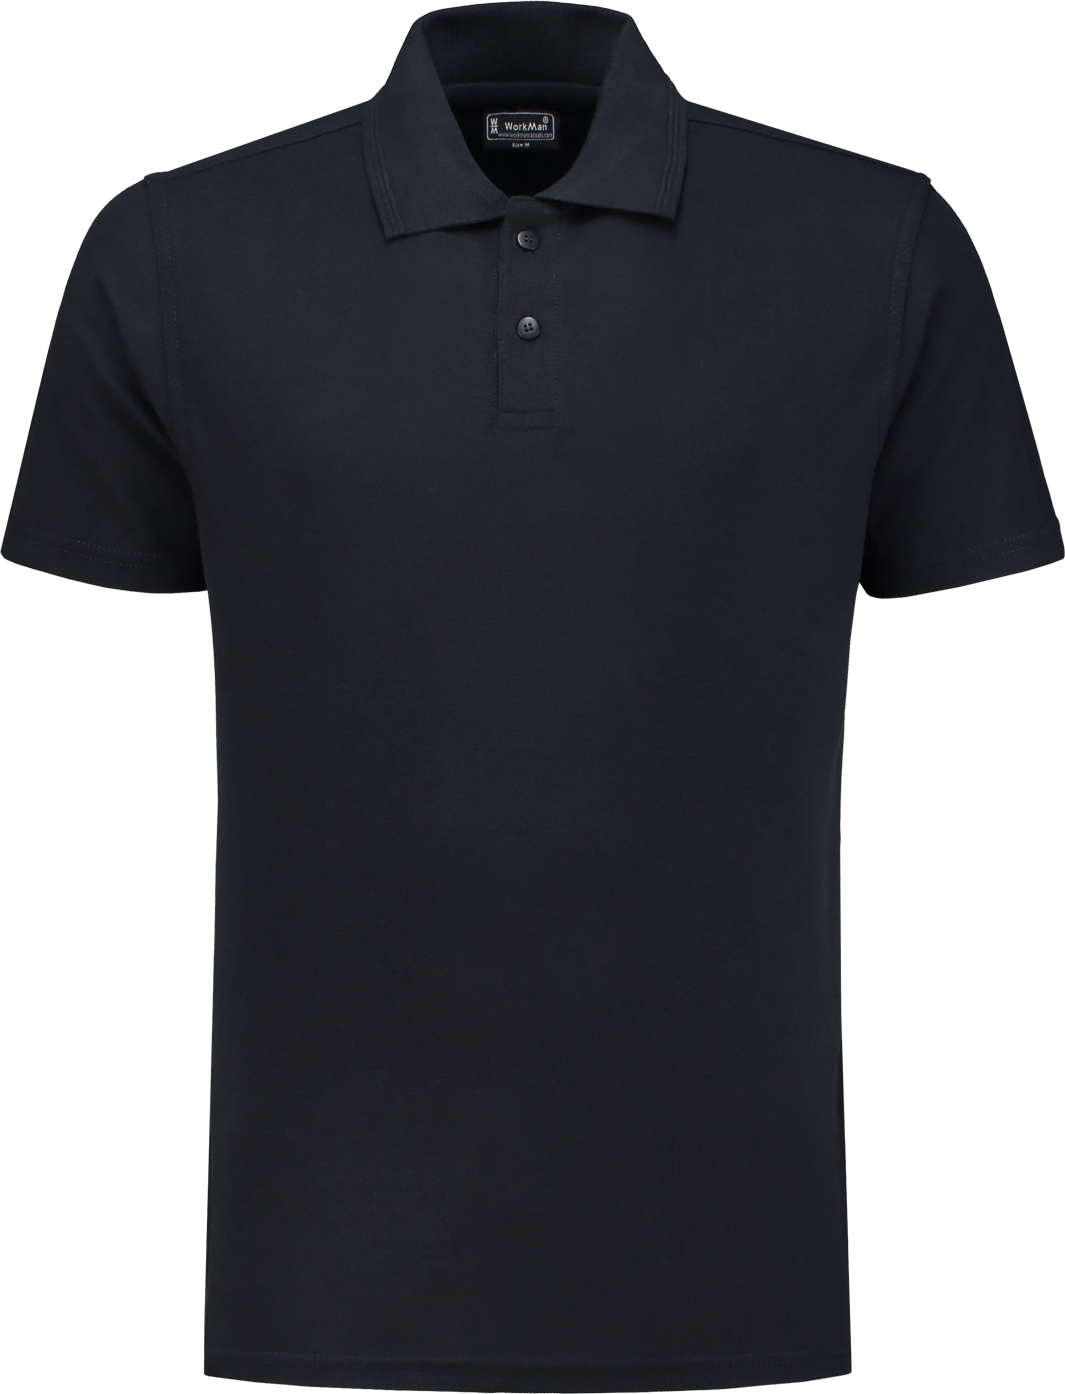 10.6.8102.01 8102 Poloshirt Outfitters Navy S